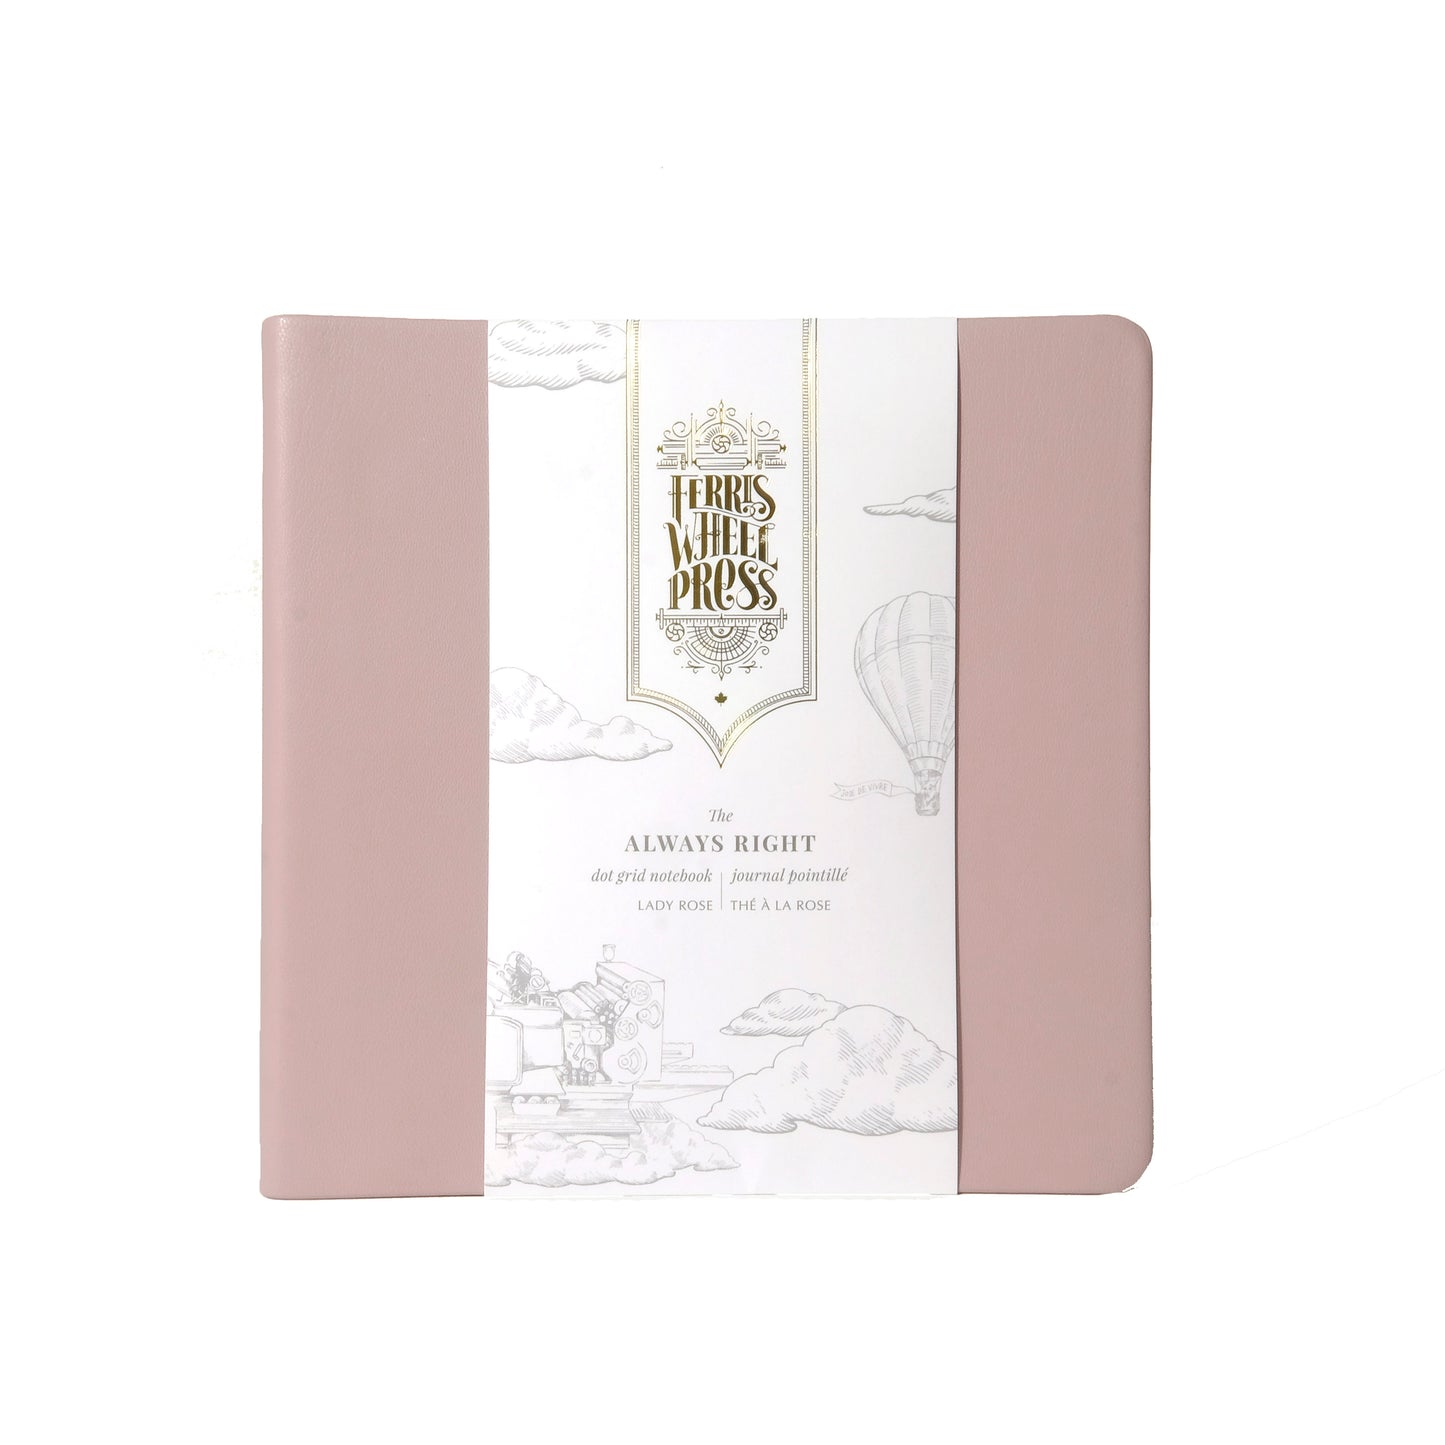 Always Right Square Fether Notebook by Ferris Wheel Press